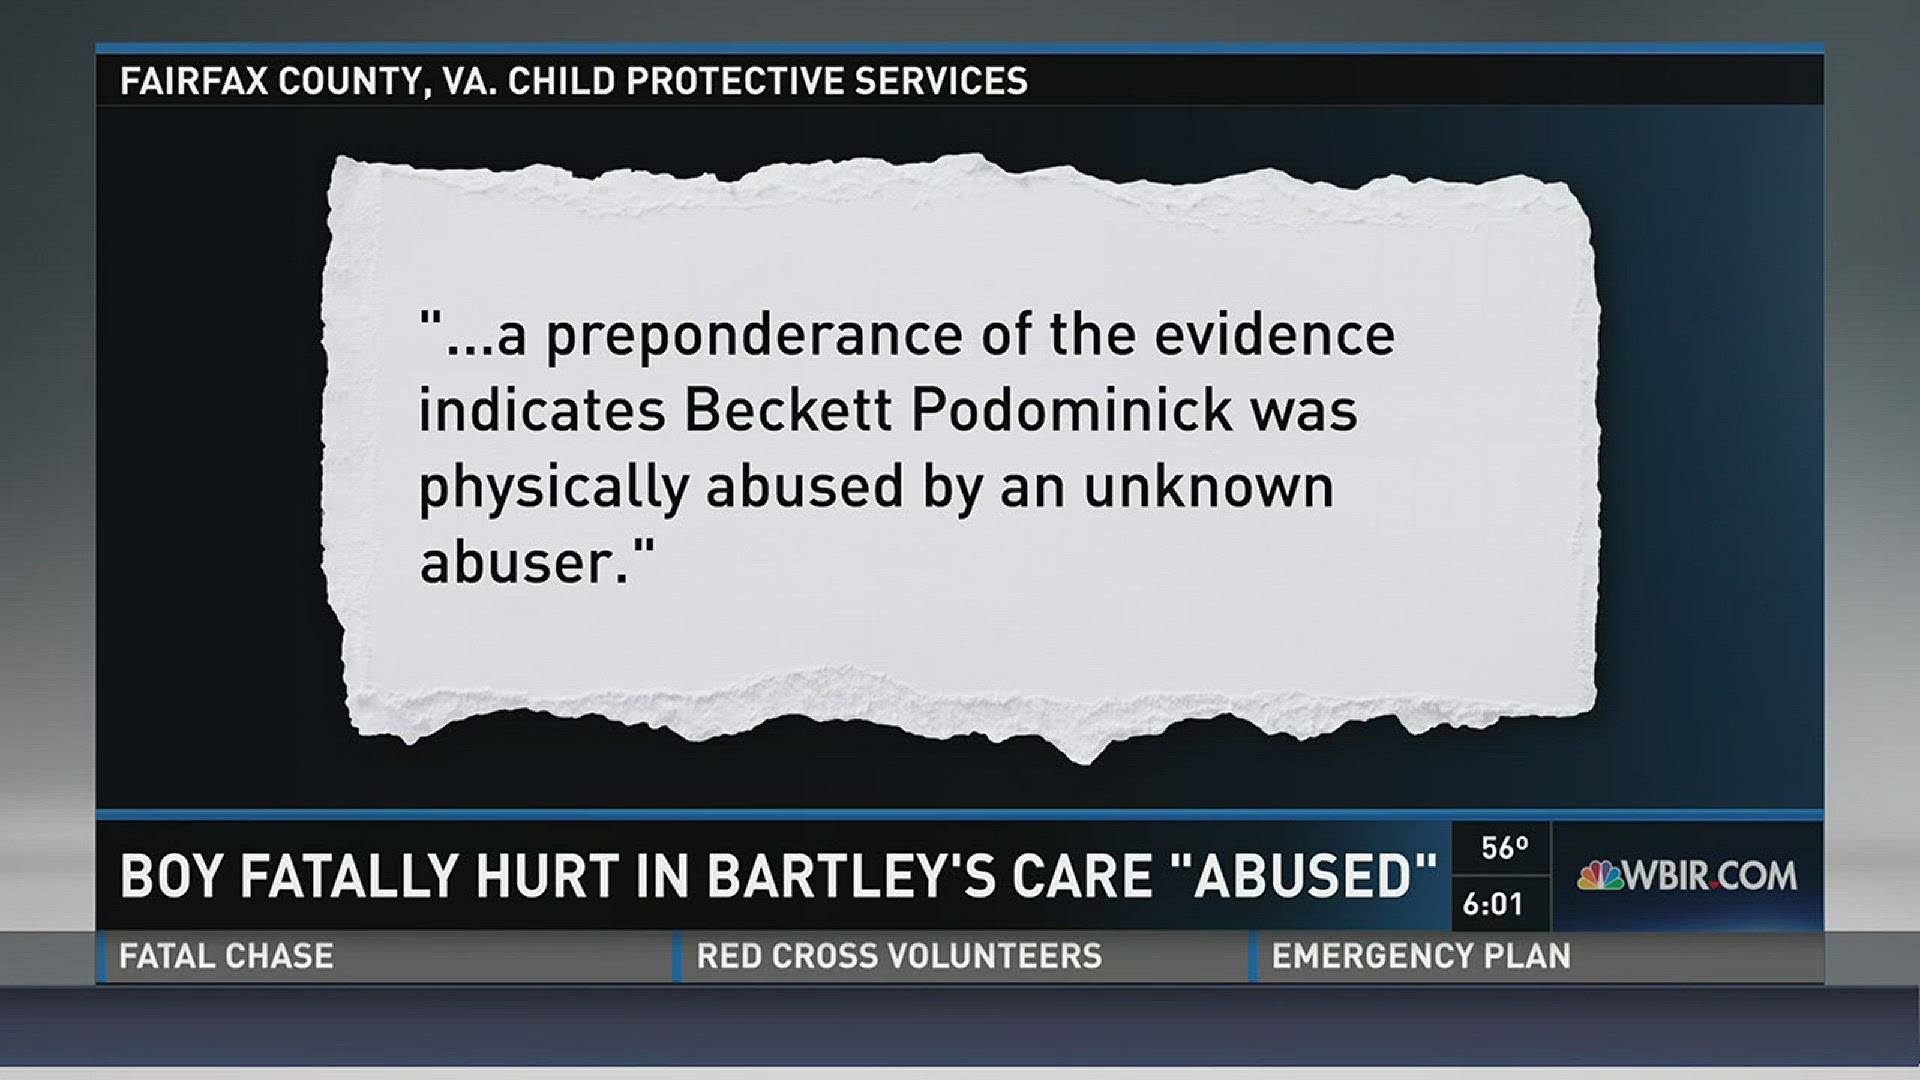 A newly revealed document raises questions about whether a 3-year-old boy who died earlier this year had suffered abuse. The boy was in Kenneth Bartley's care when his mother says he fell and suffered a fatal injury. Dec. 30, 2015